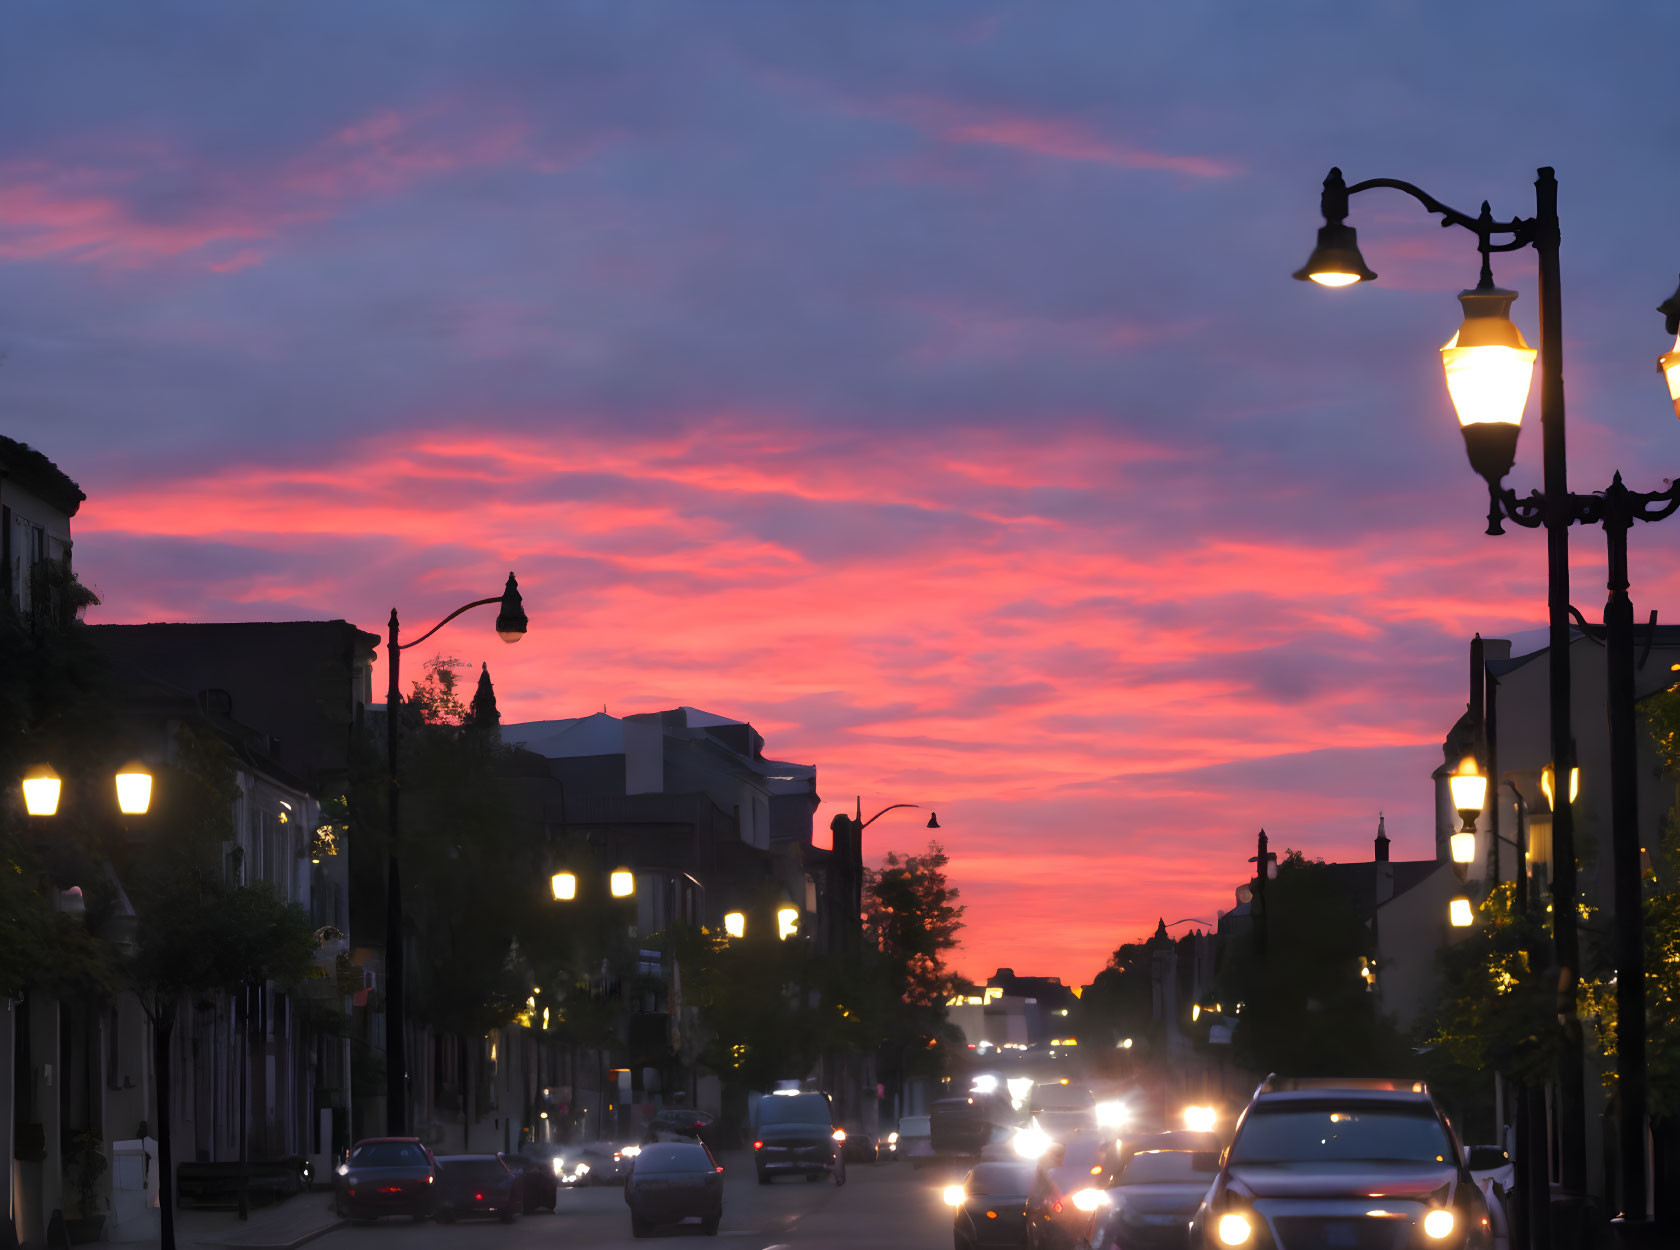 Vibrant sunset over urban street with pink and blue hues